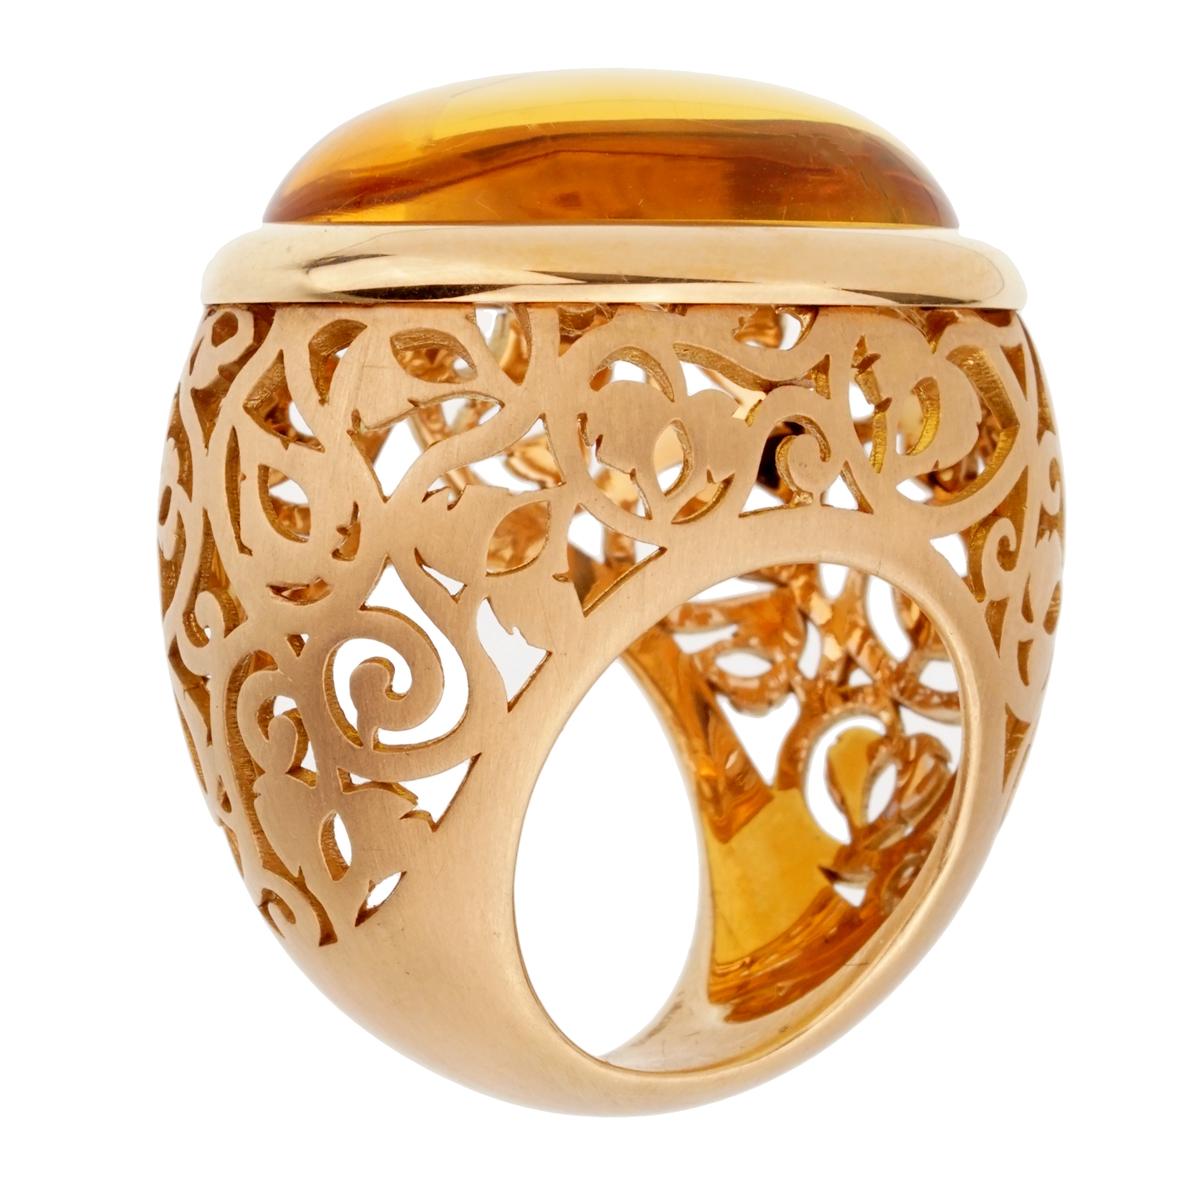 A magnificent brand new Pomellato rose gold cocktail ring showcasing a 19.94ct cabochon Amber. The ring measures a size 8 and can be resized.

Pomellato Retail Price: $7,800
Sku: 2324